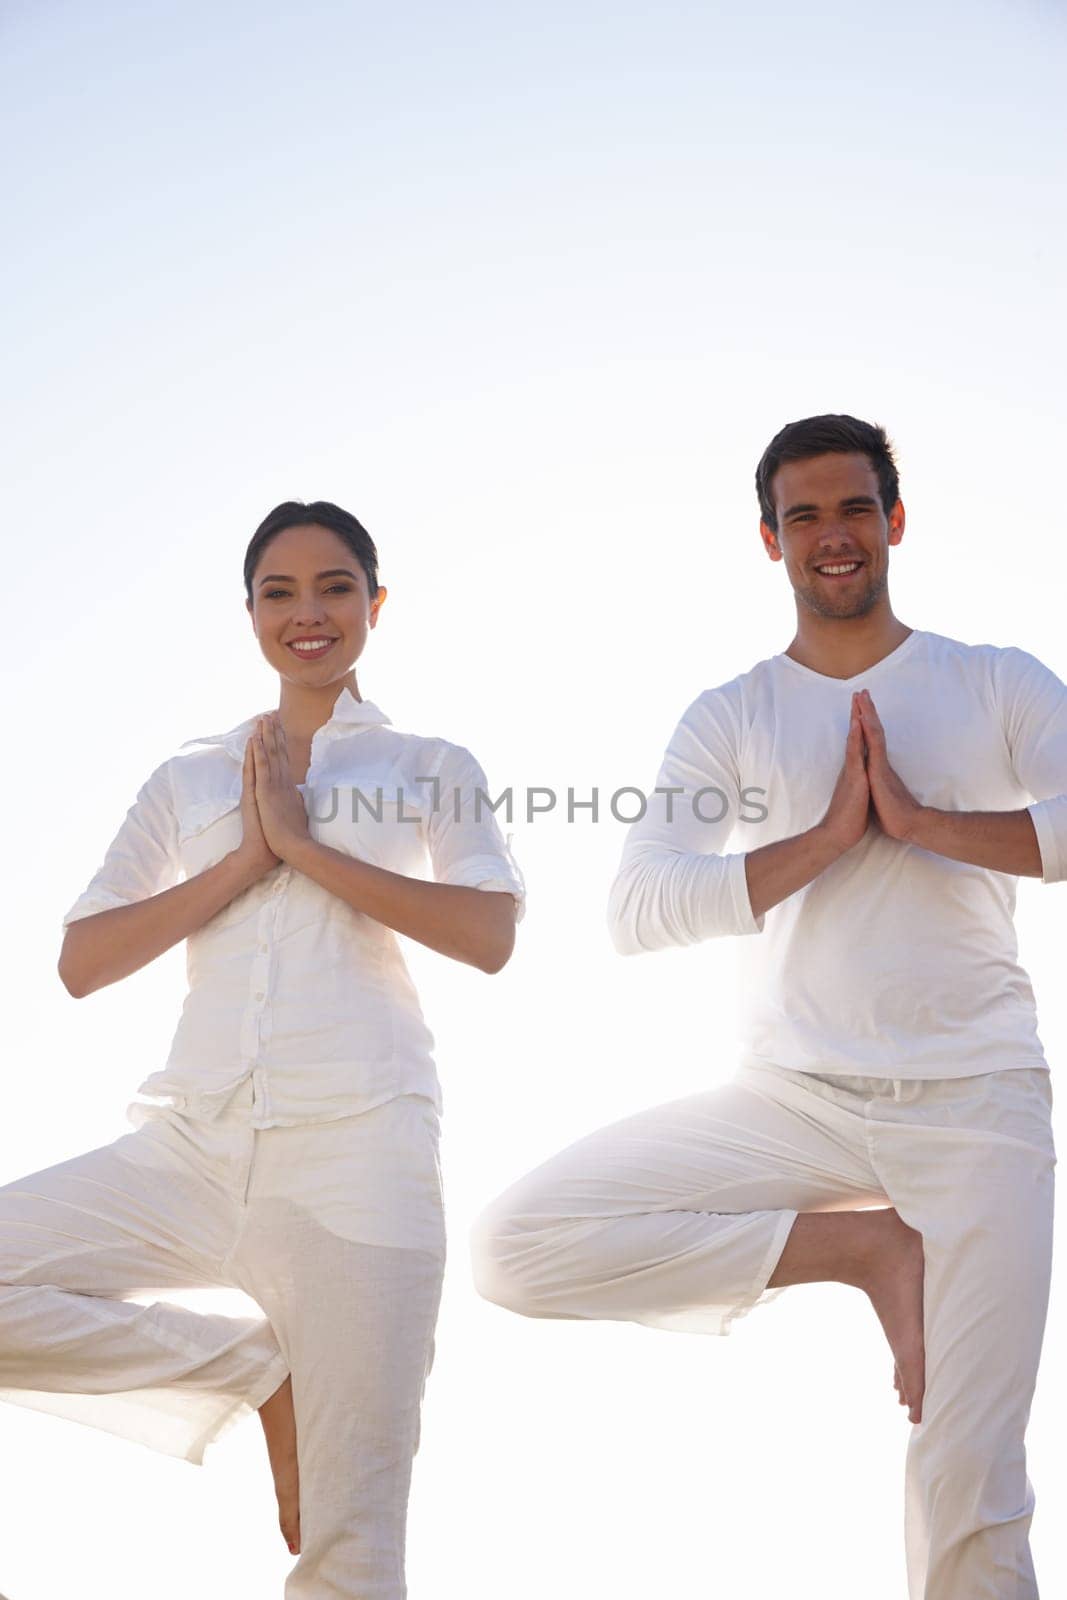 Yoga stances that improve balance. a young man and woman doing yoga outdoors. by YuriArcurs